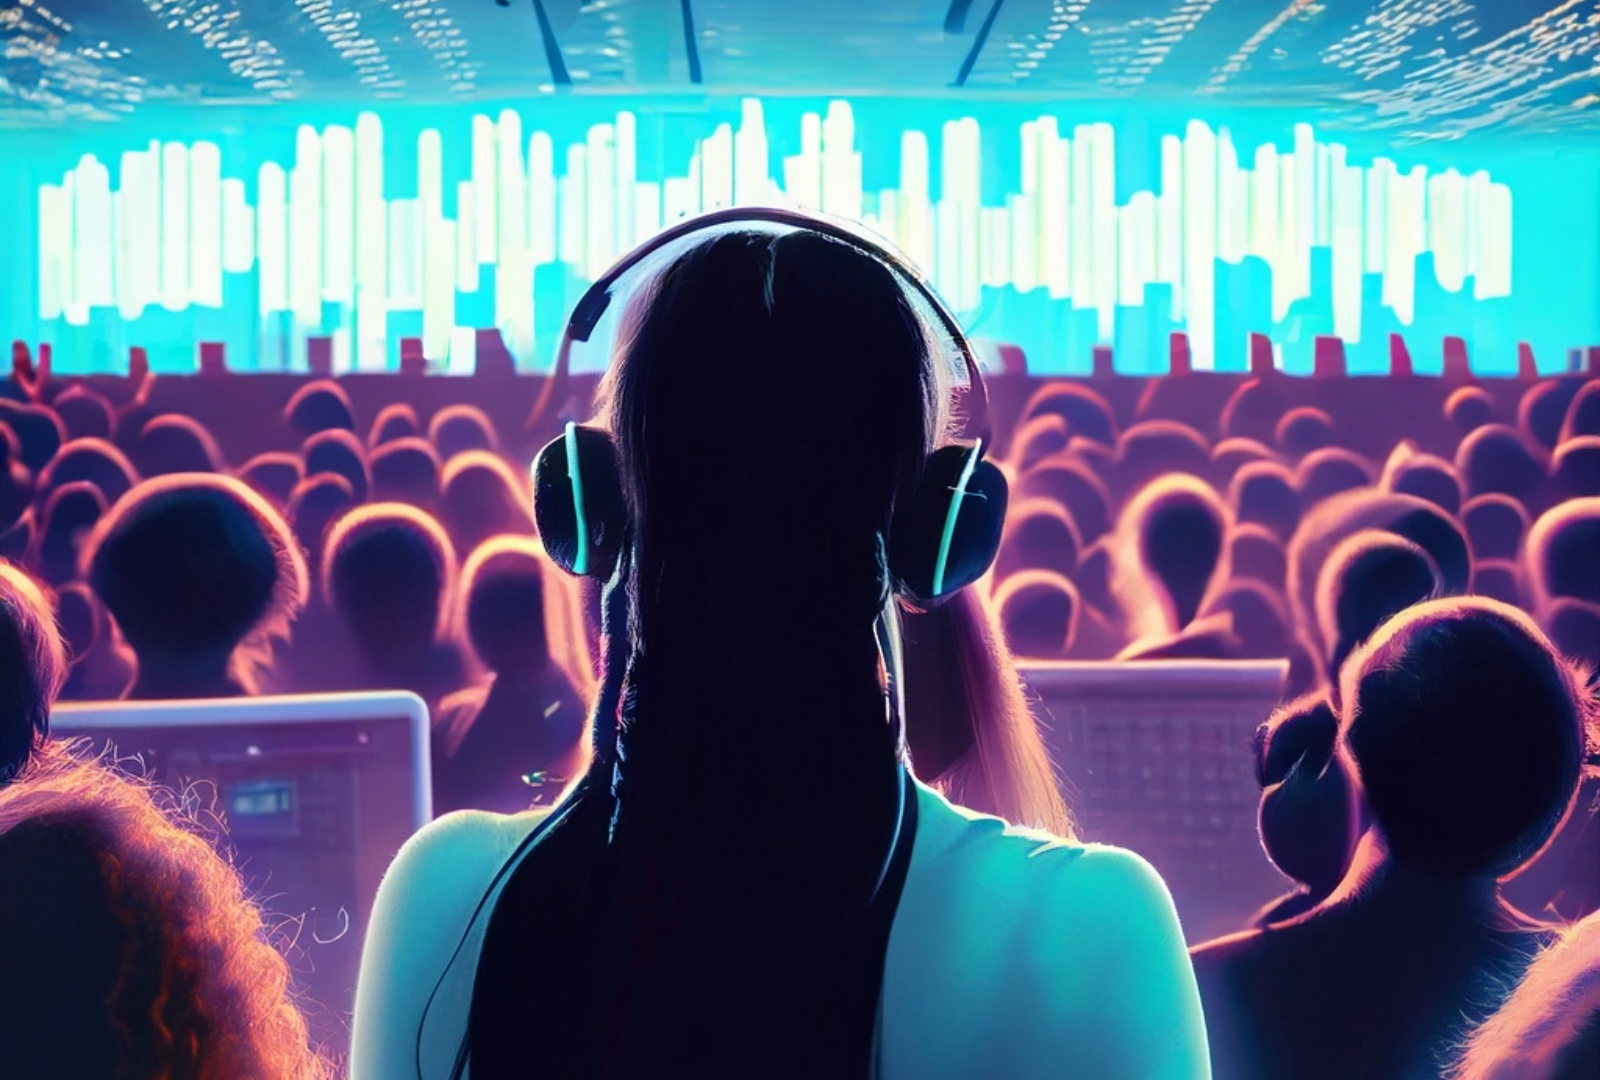 Graphic depicting the back of a woman wearing headphones in the midst of a full audience watching a digital performance of light, neon-blue soundwaves on a screen at the front of an auditorium.